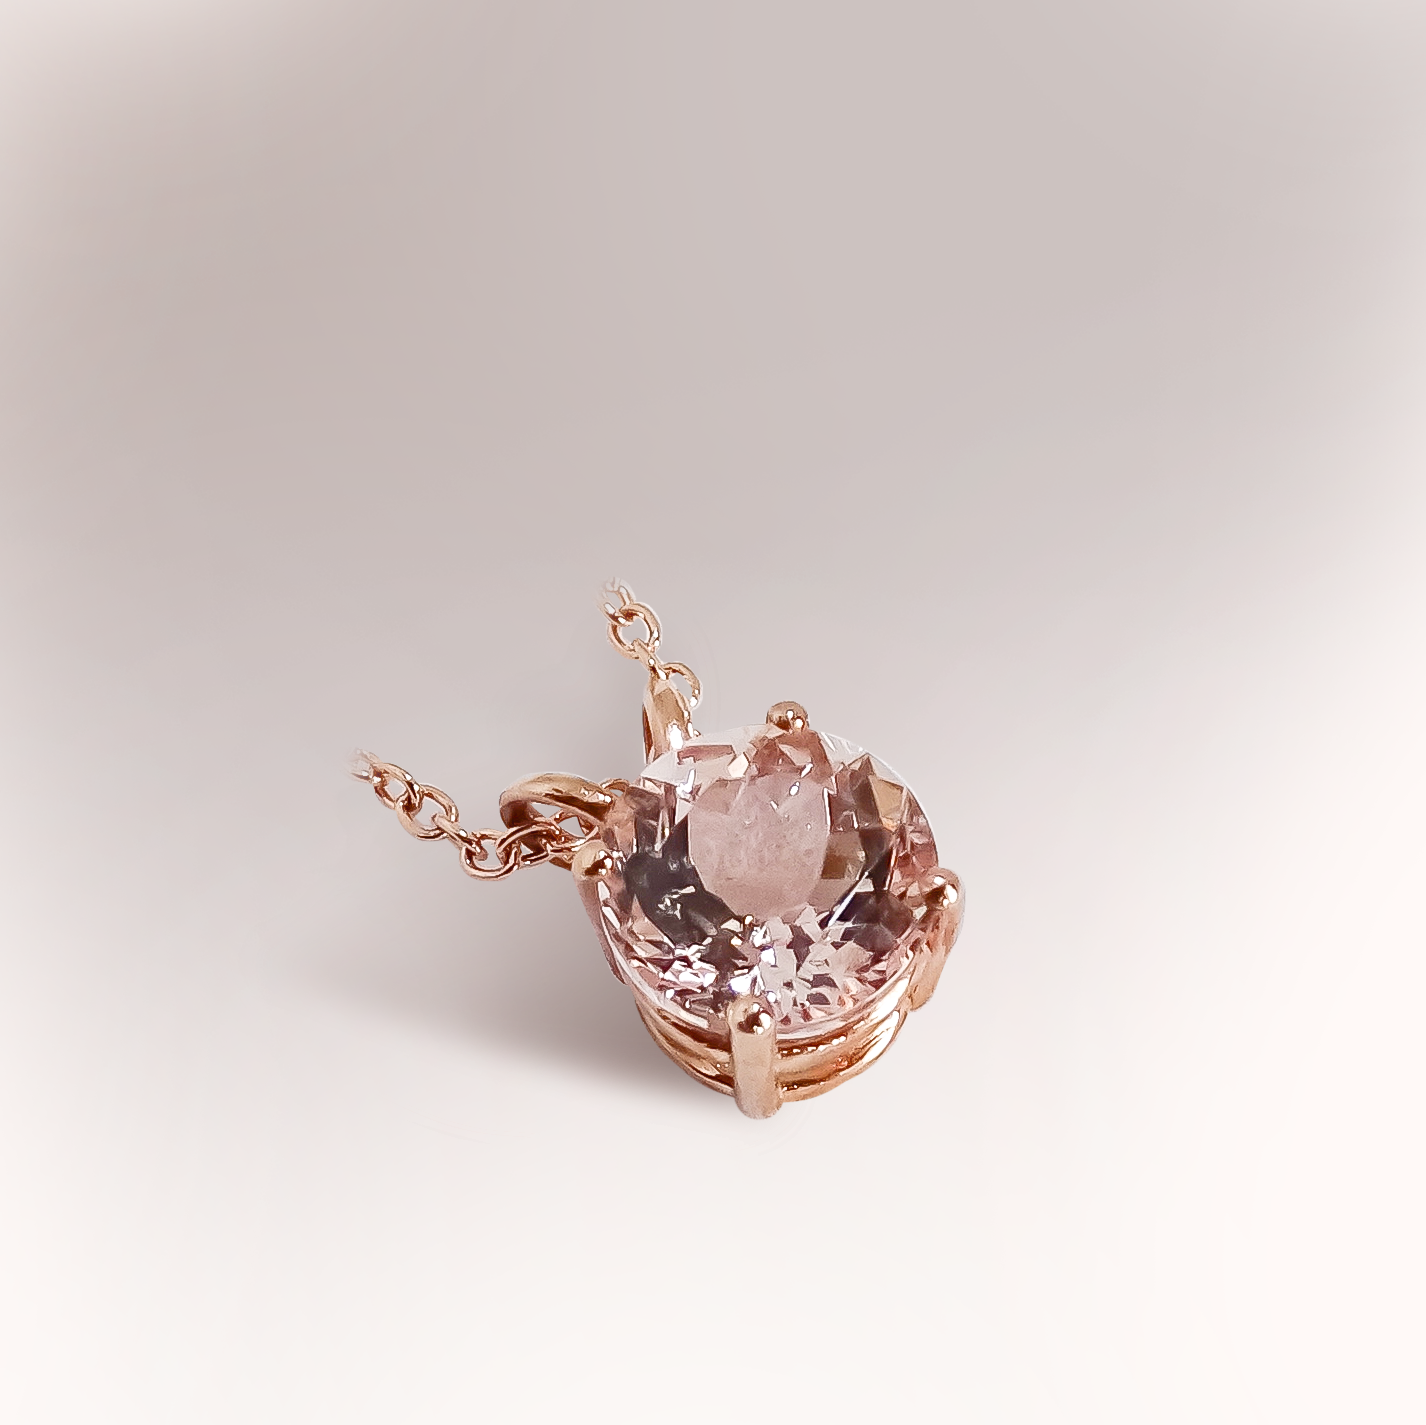 1.411ct Morganite Solitaire Pendant in 9ct Rose Gold on Chain